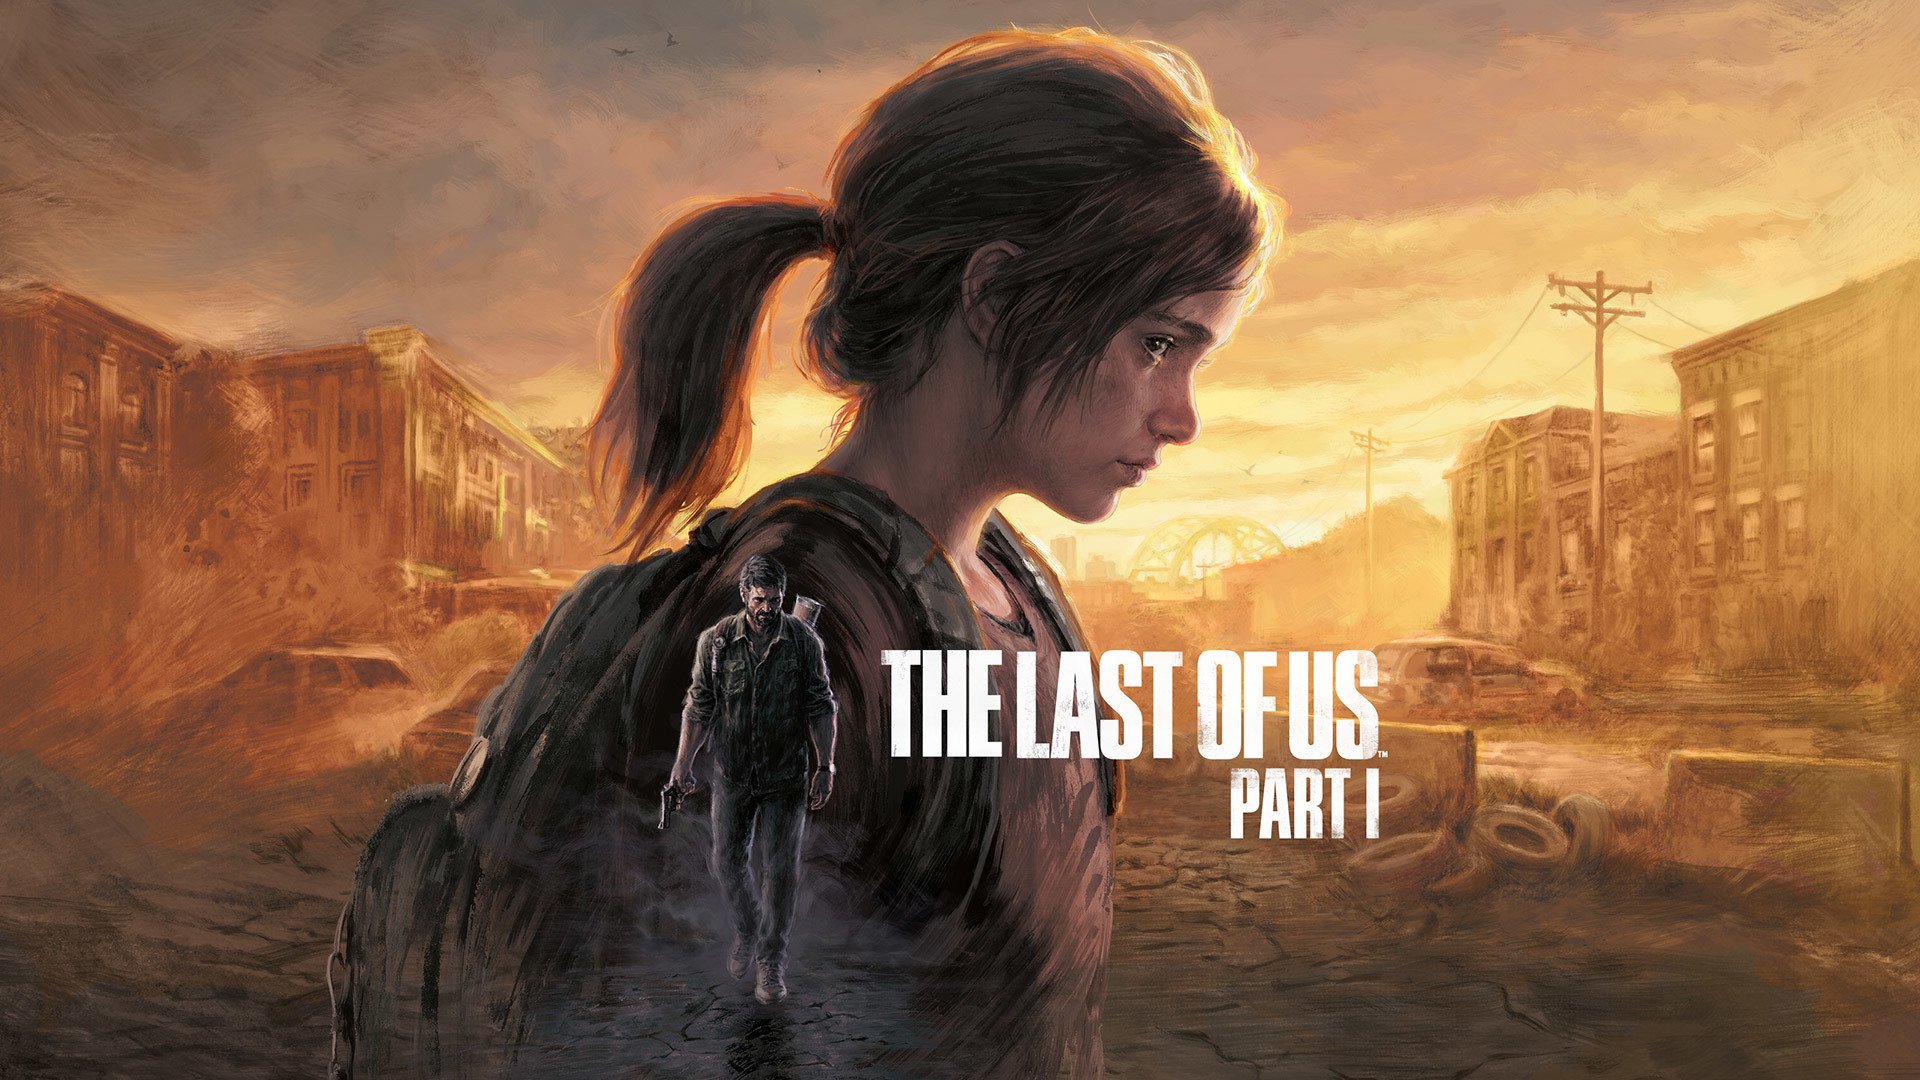 I have finally bought the last of us part 1 (the remake) The last of us  remastered was the first game I ever played on my ps4 when my dad bought it